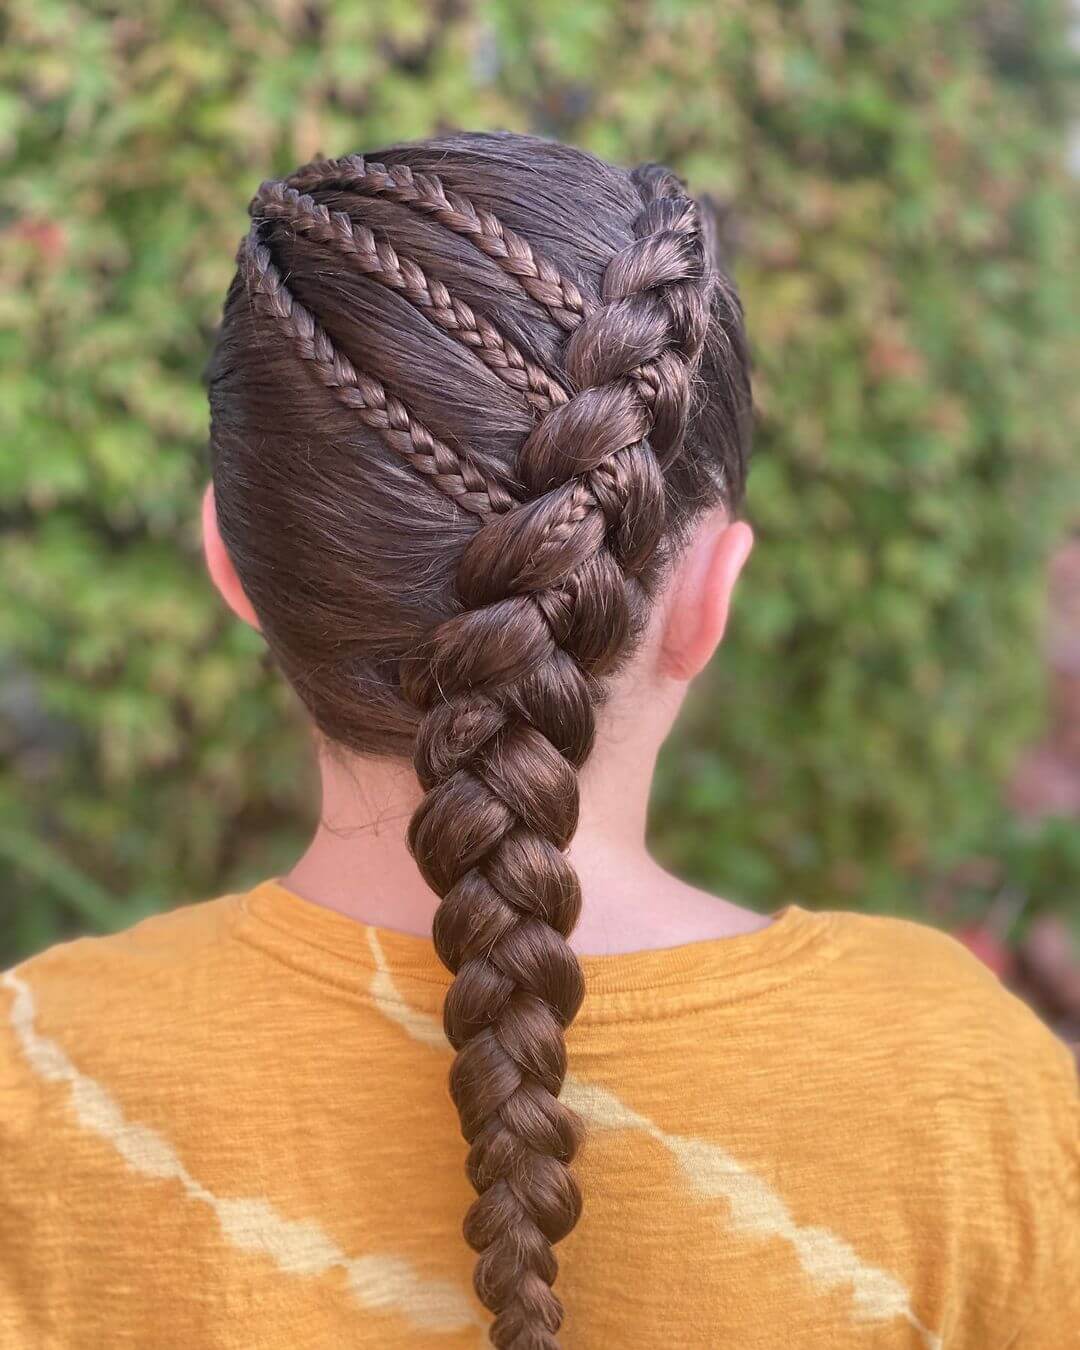 Braids for kids with long hair Knotted with simple braids for kids